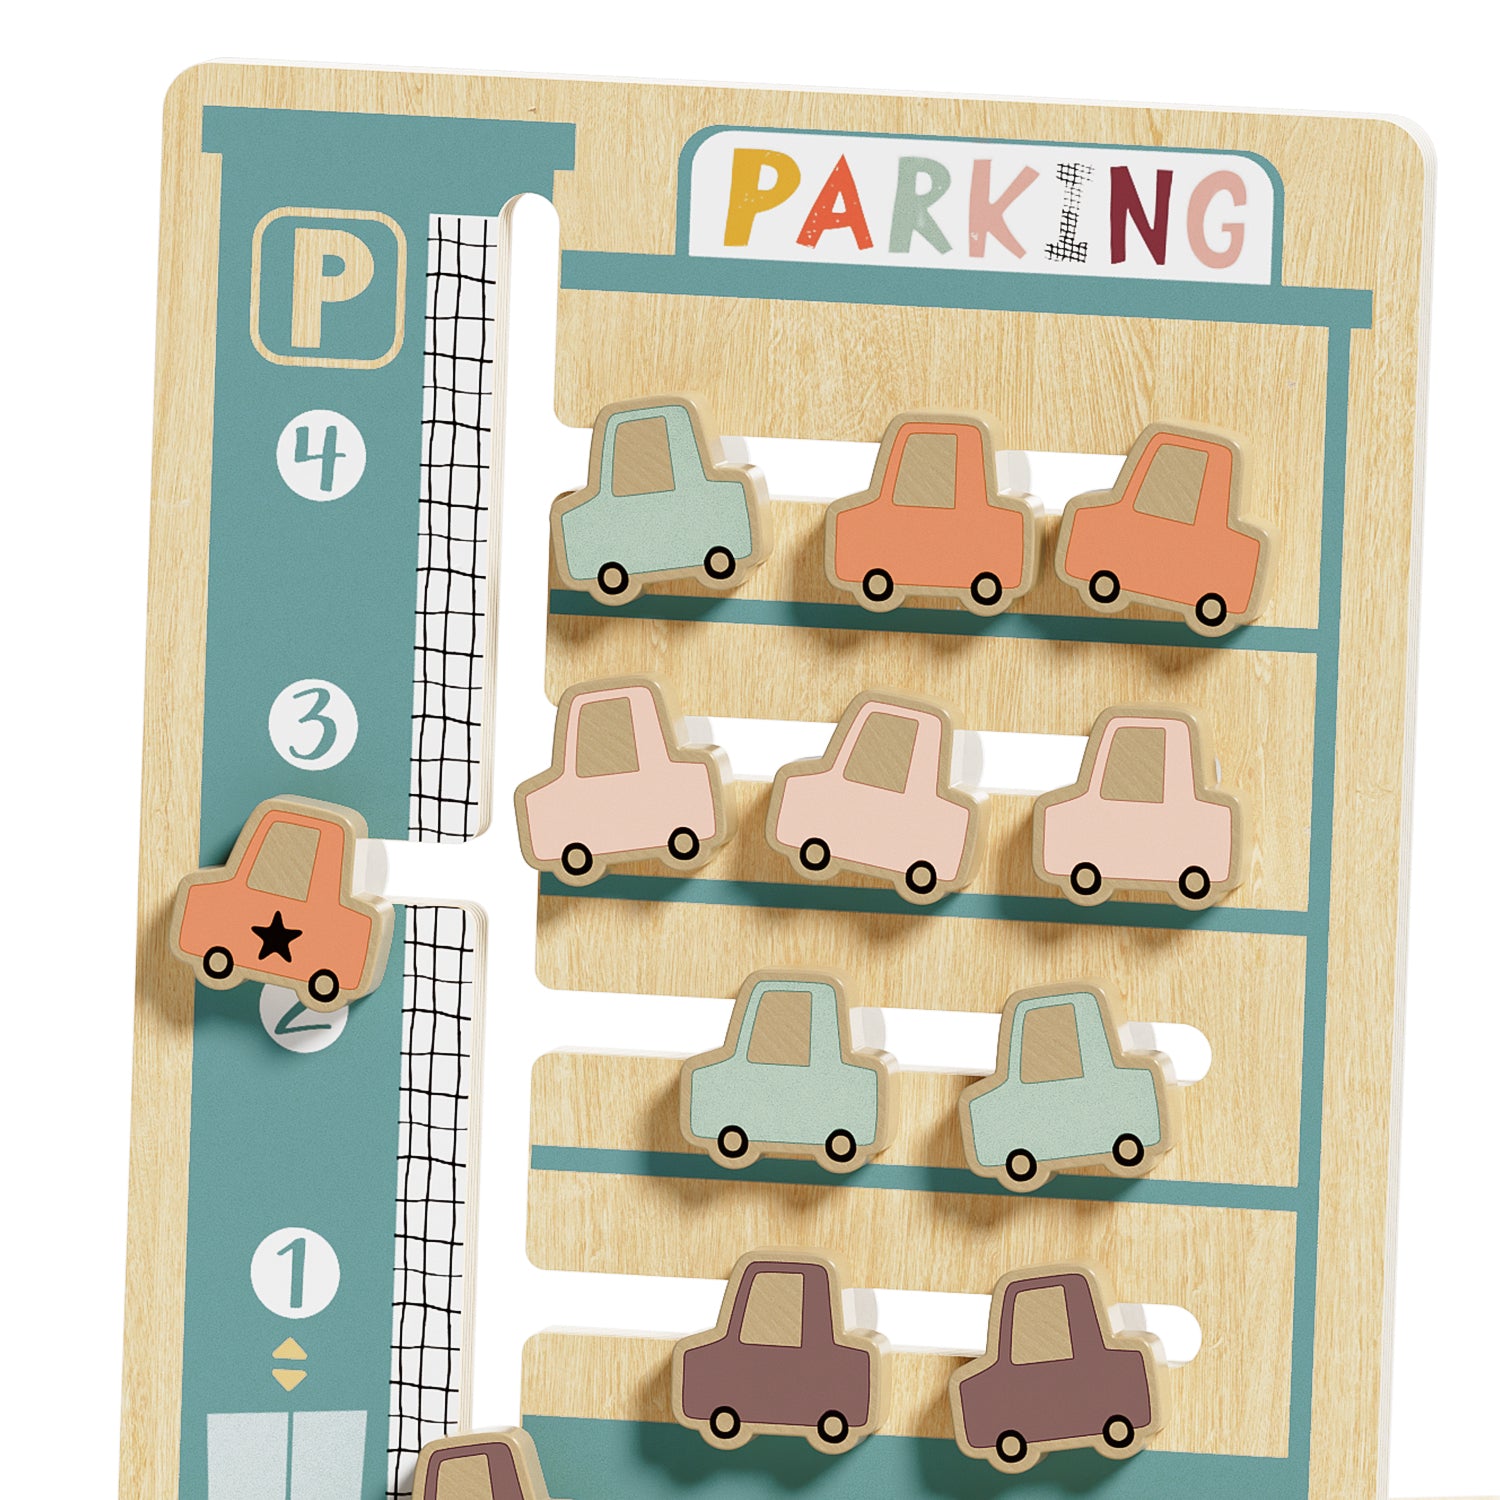 All corners are rounded and the cars are ideal for small children's hands to grasp.